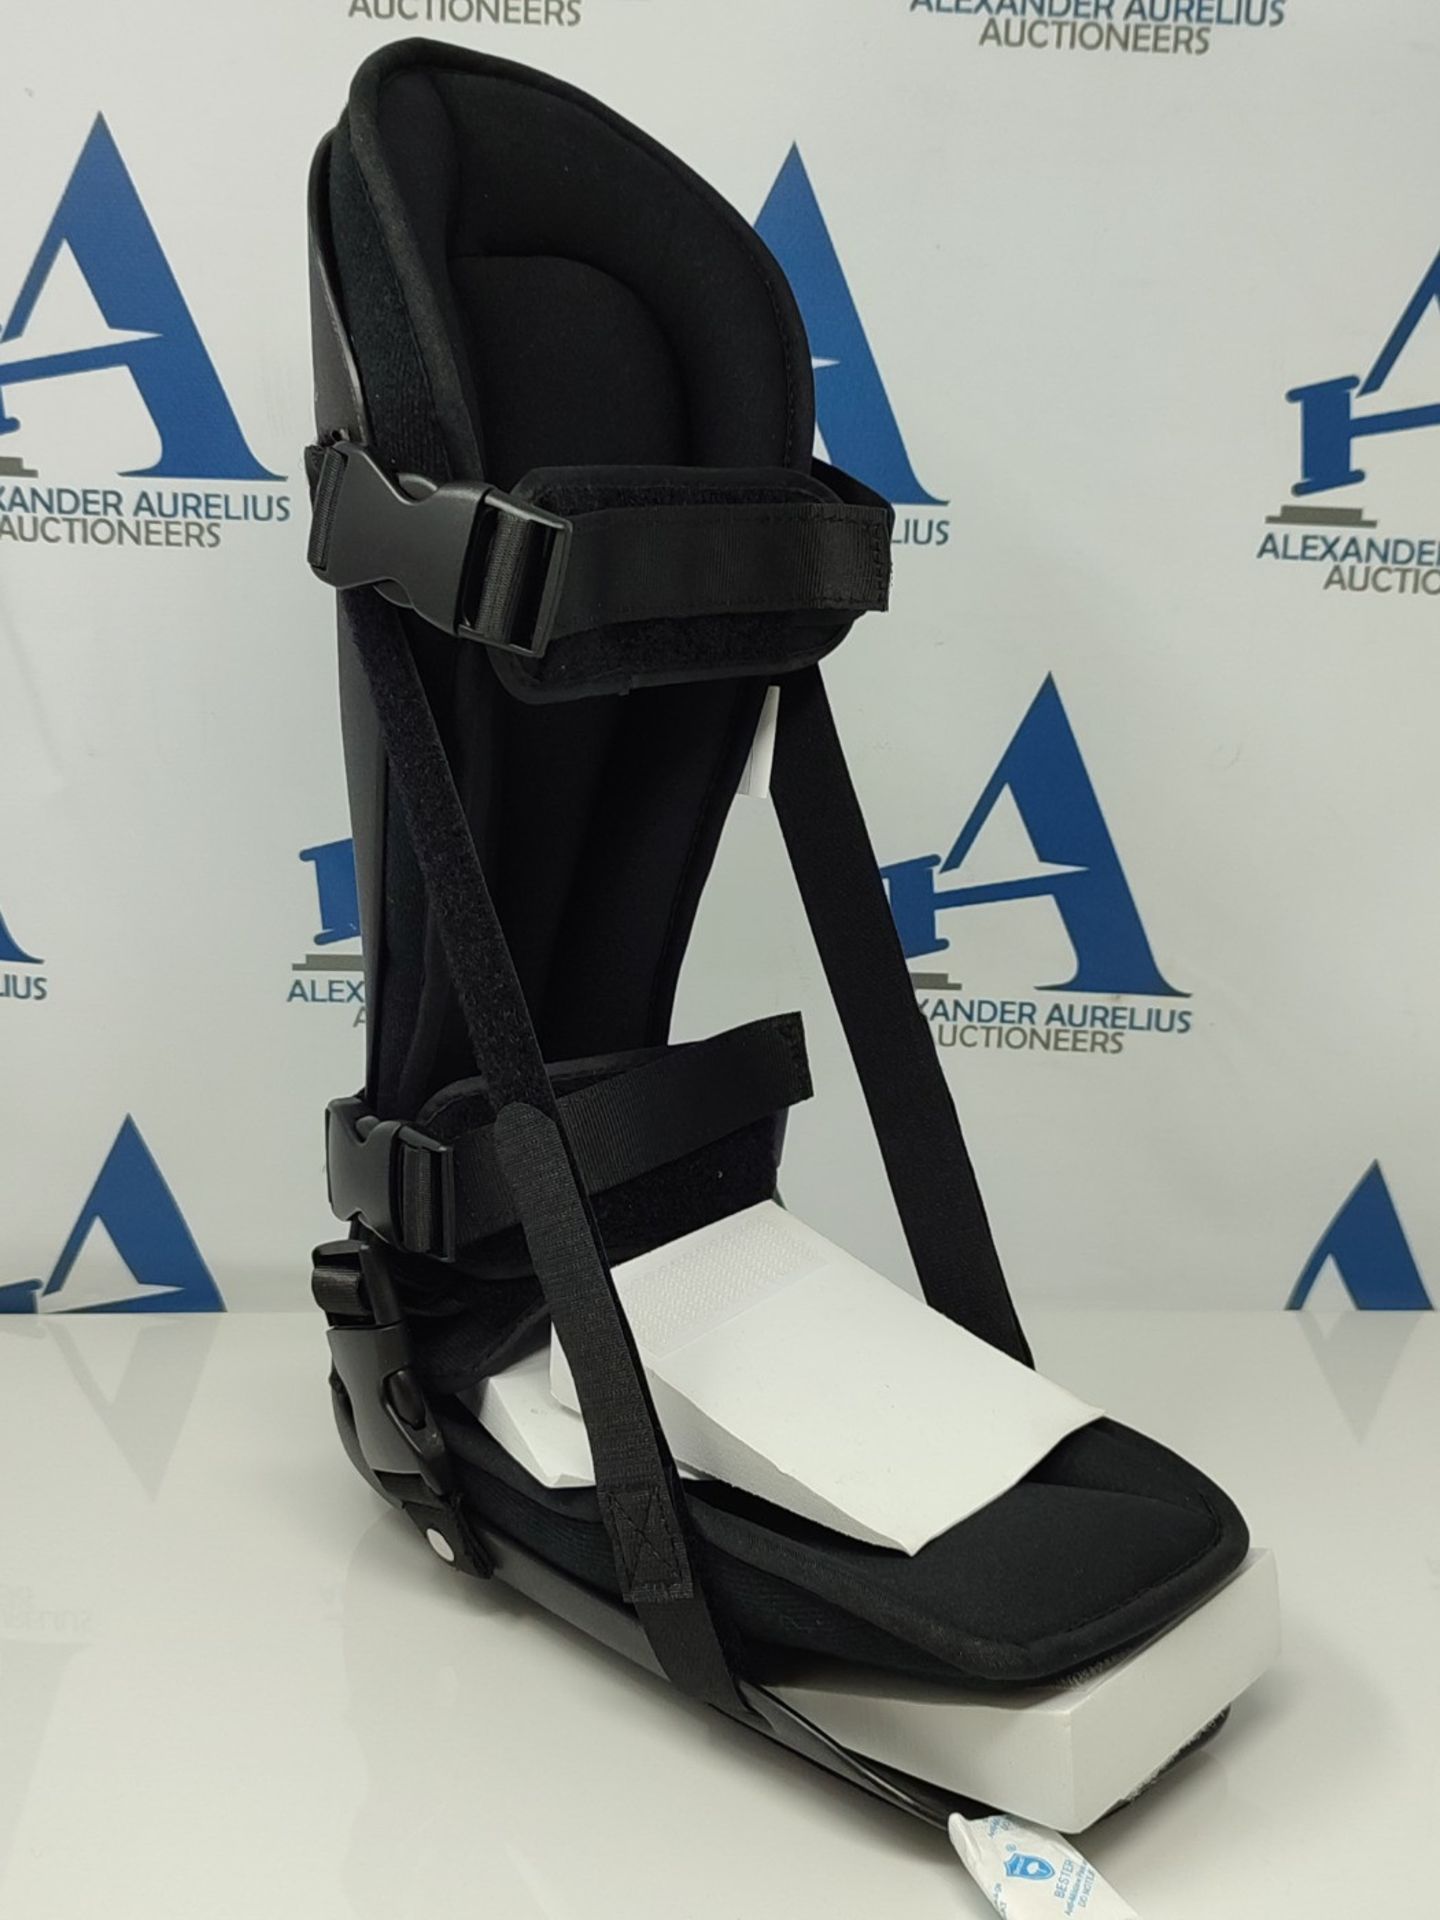 Medically Approved - Plantar Fasciitis Achilles Resting Splint with Luxury Padded Line